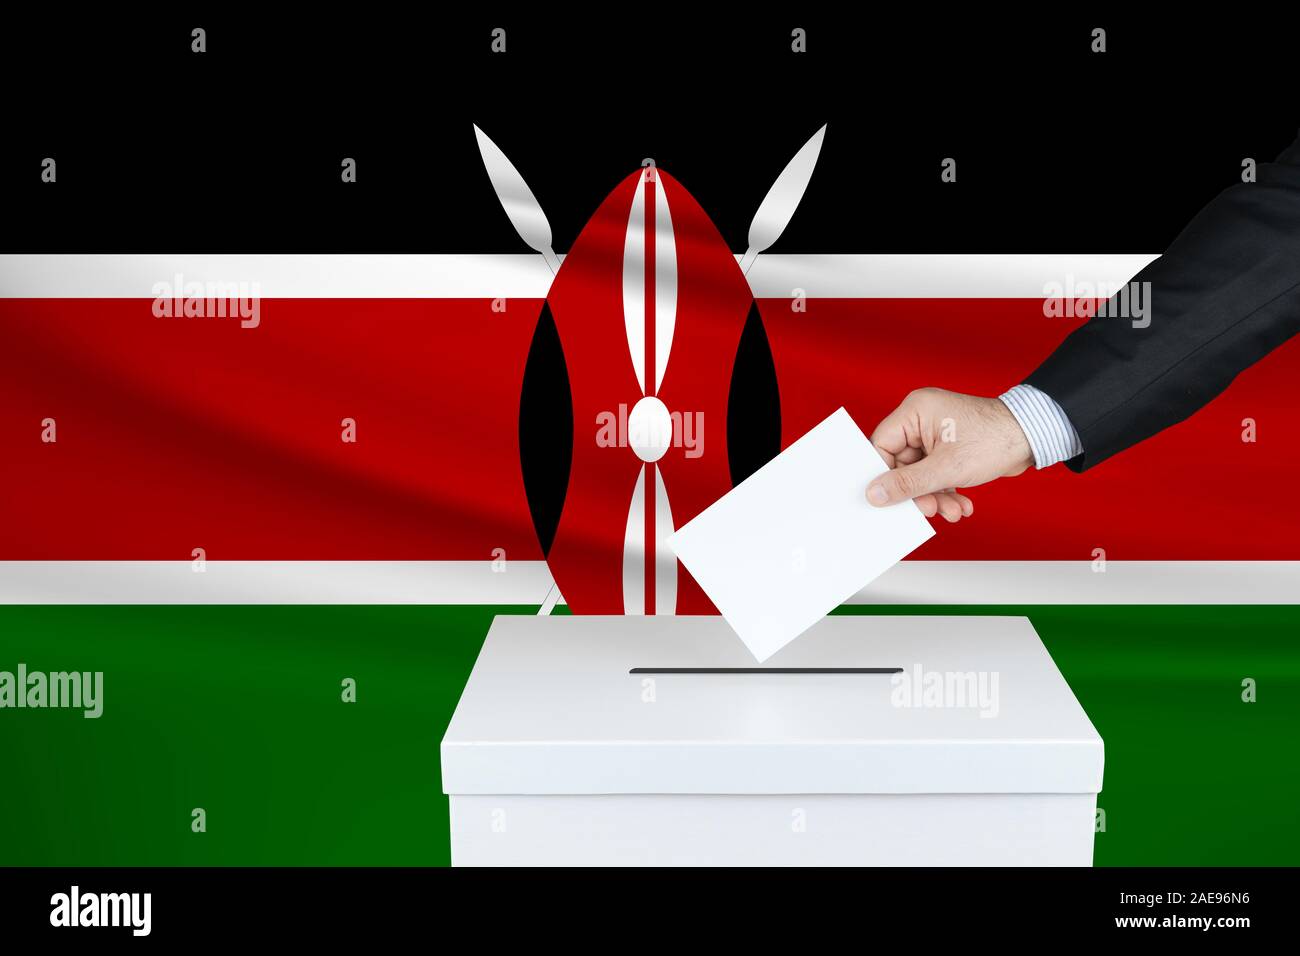 Election in Kenya. The hand of man putting his vote in the ballot box. Waved Kenya flag on background. Stock Photo